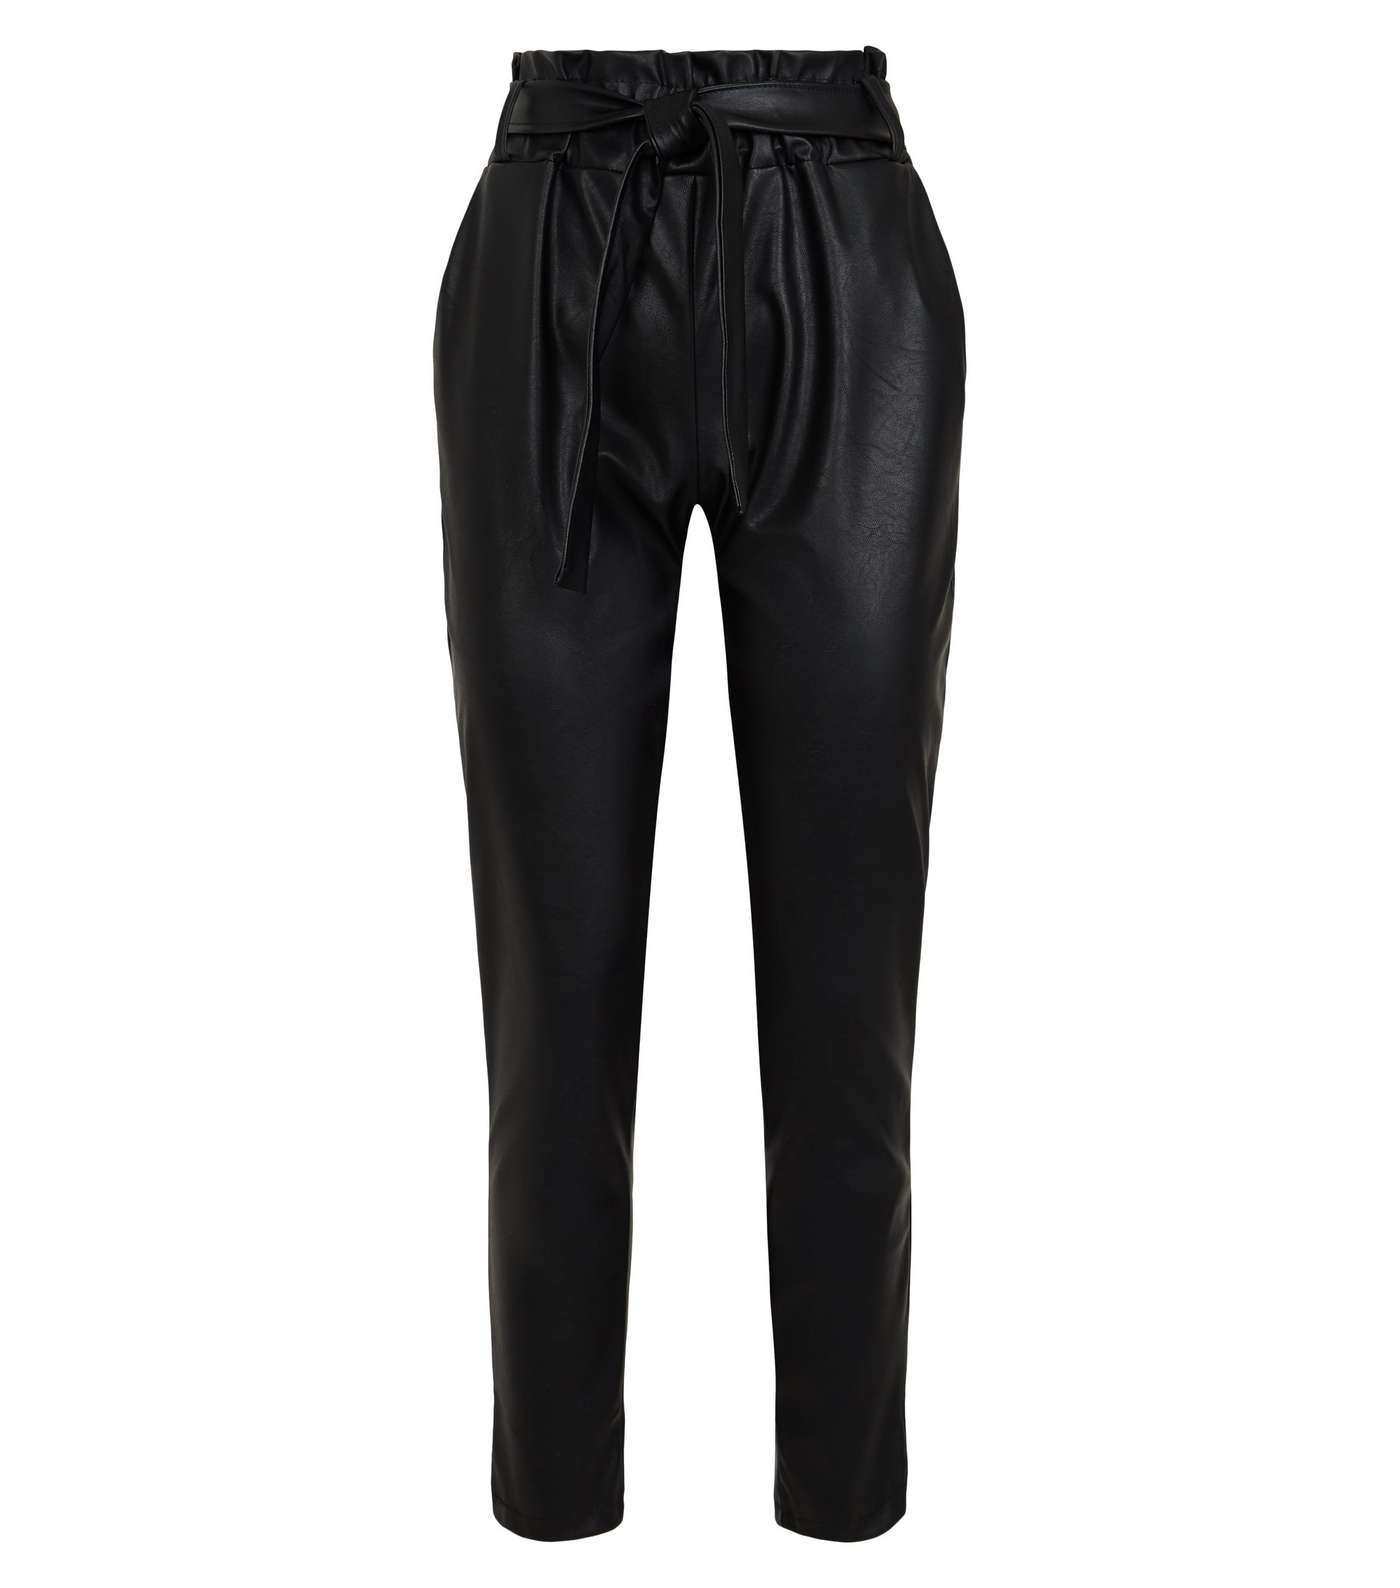 Cameo Rose Black Leather-Look High Waist Trousers Image 4